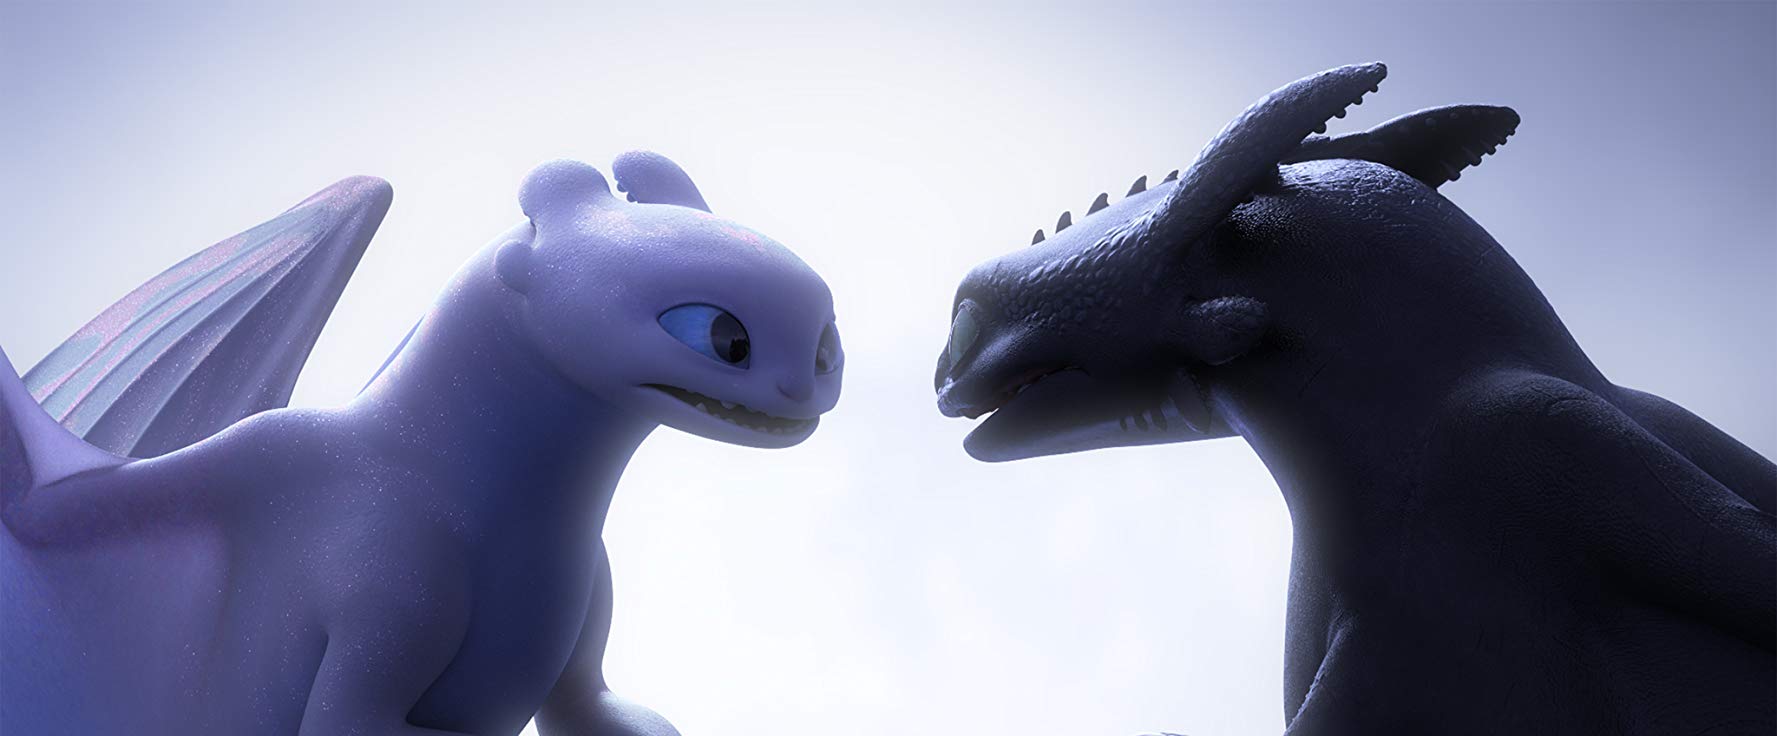 Toothless finds a love interest in the Light Fury in How to Train Your Dragon: The Hidden World (2019)